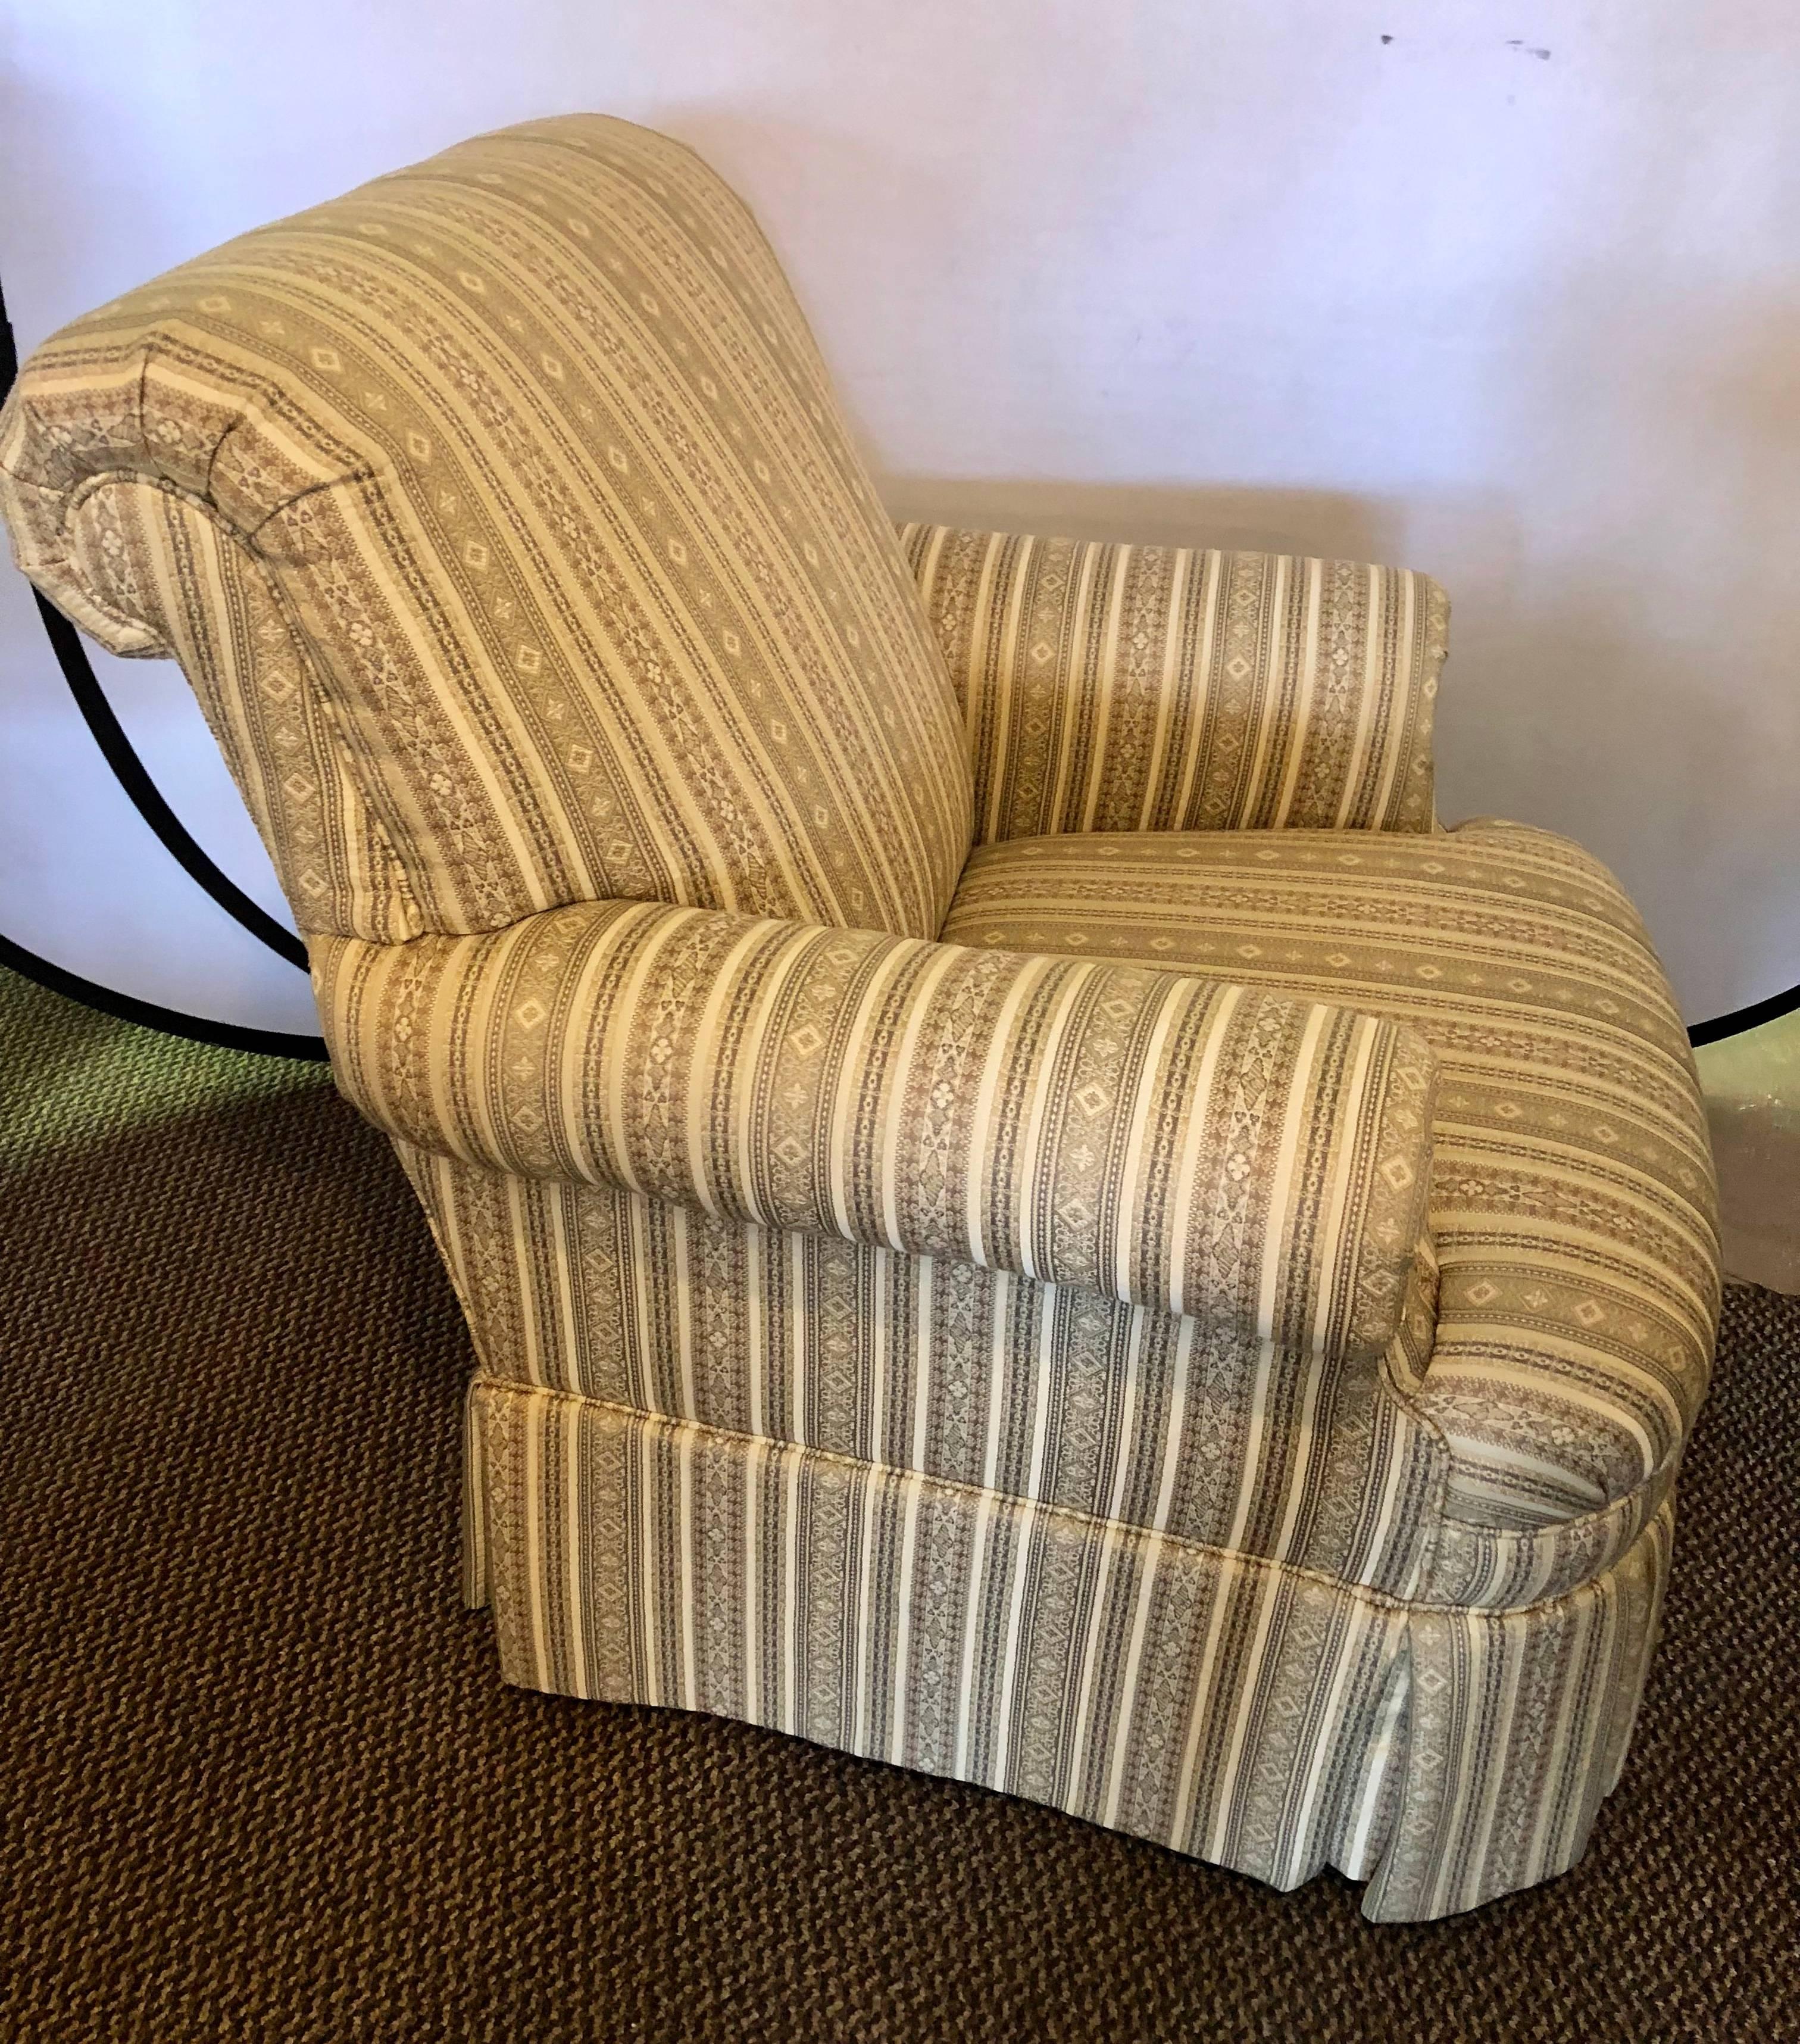 Pair of Hollywood Regency style custom overstuffed arm / lounge chairs in fine fabric. Direct from a Long Island Gold Coast Mansion. Sharp, sleek and clean.